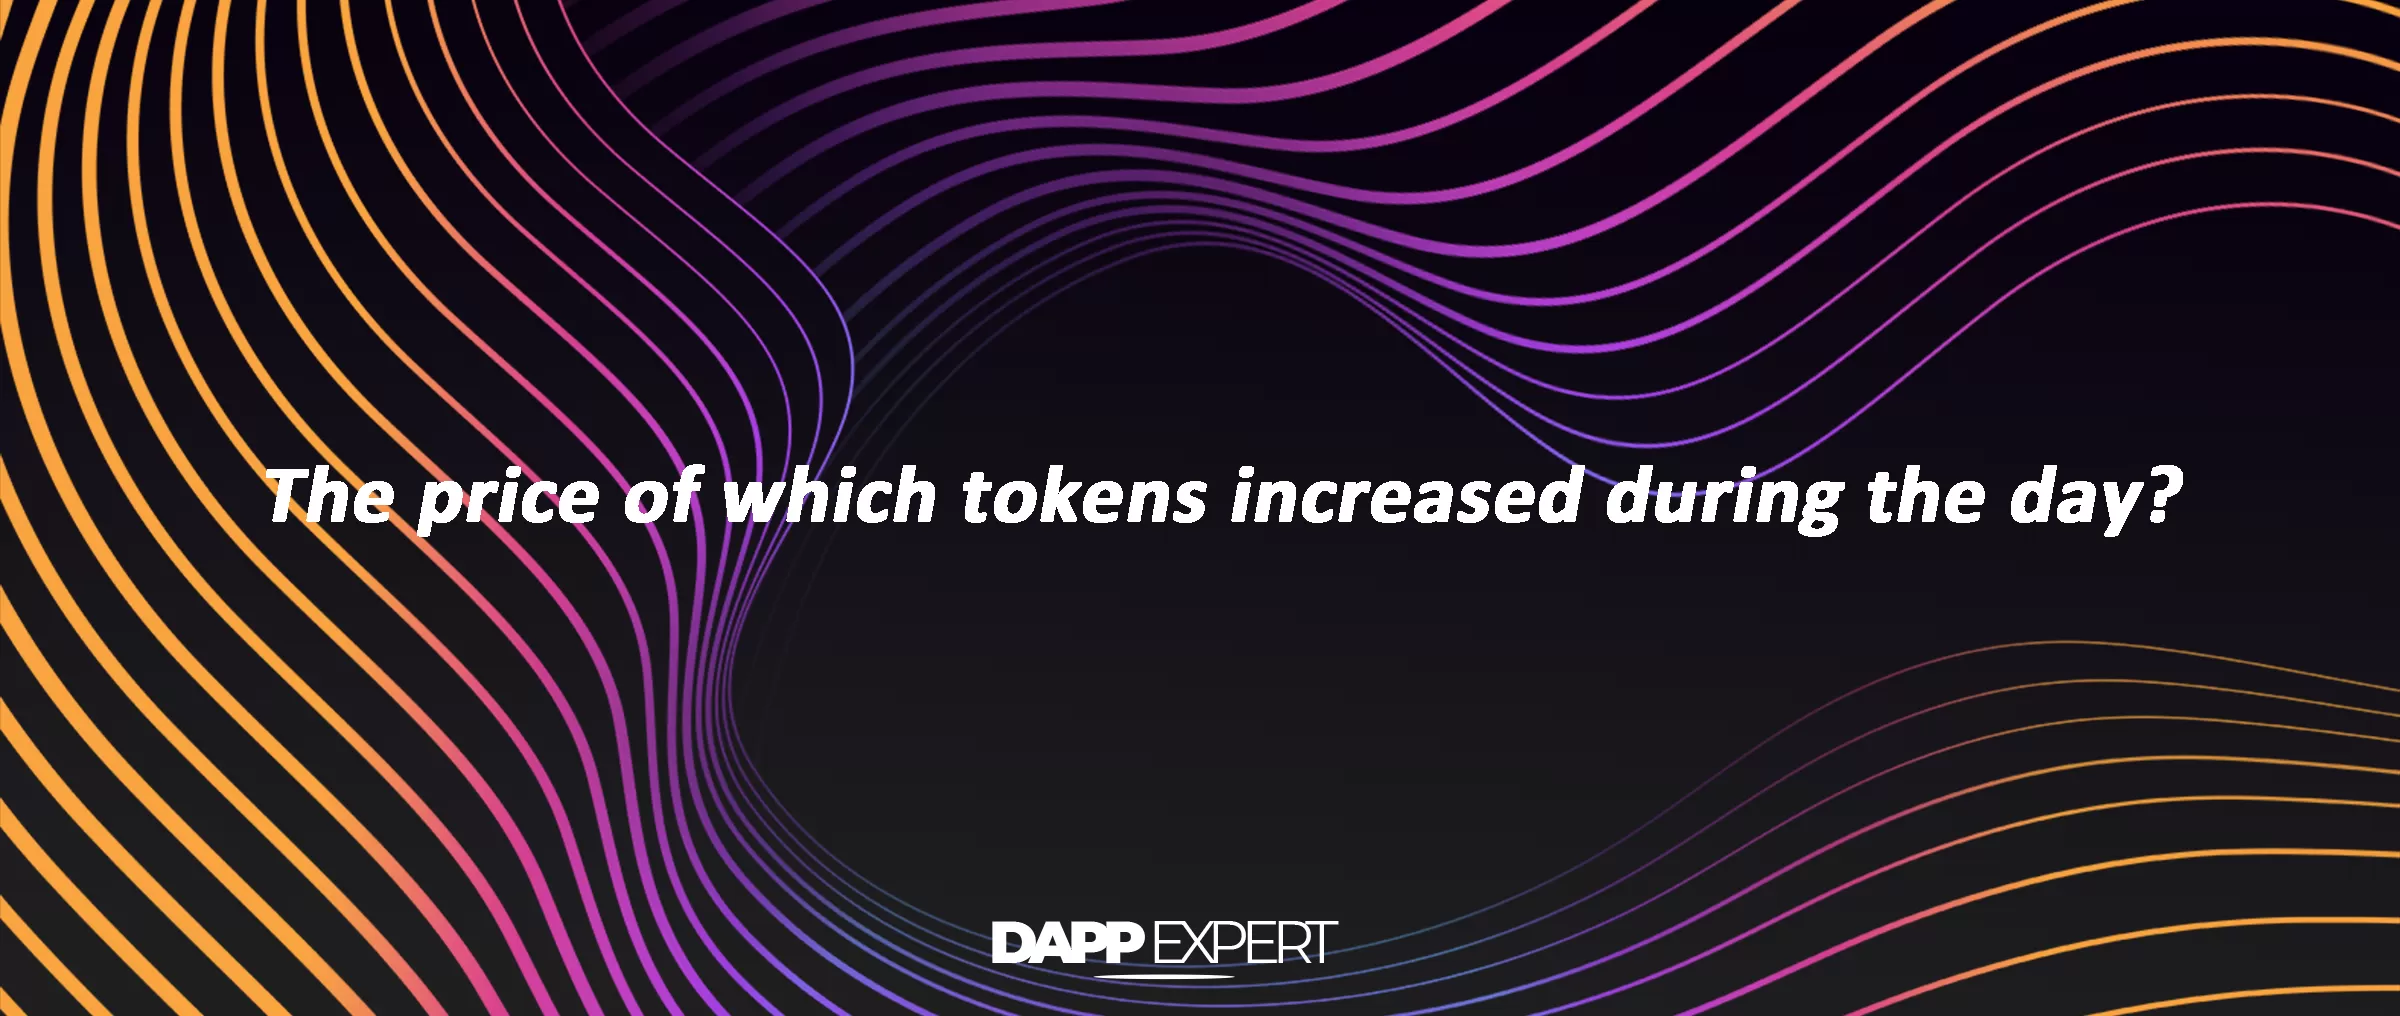 The price of which tokens increased during the day?